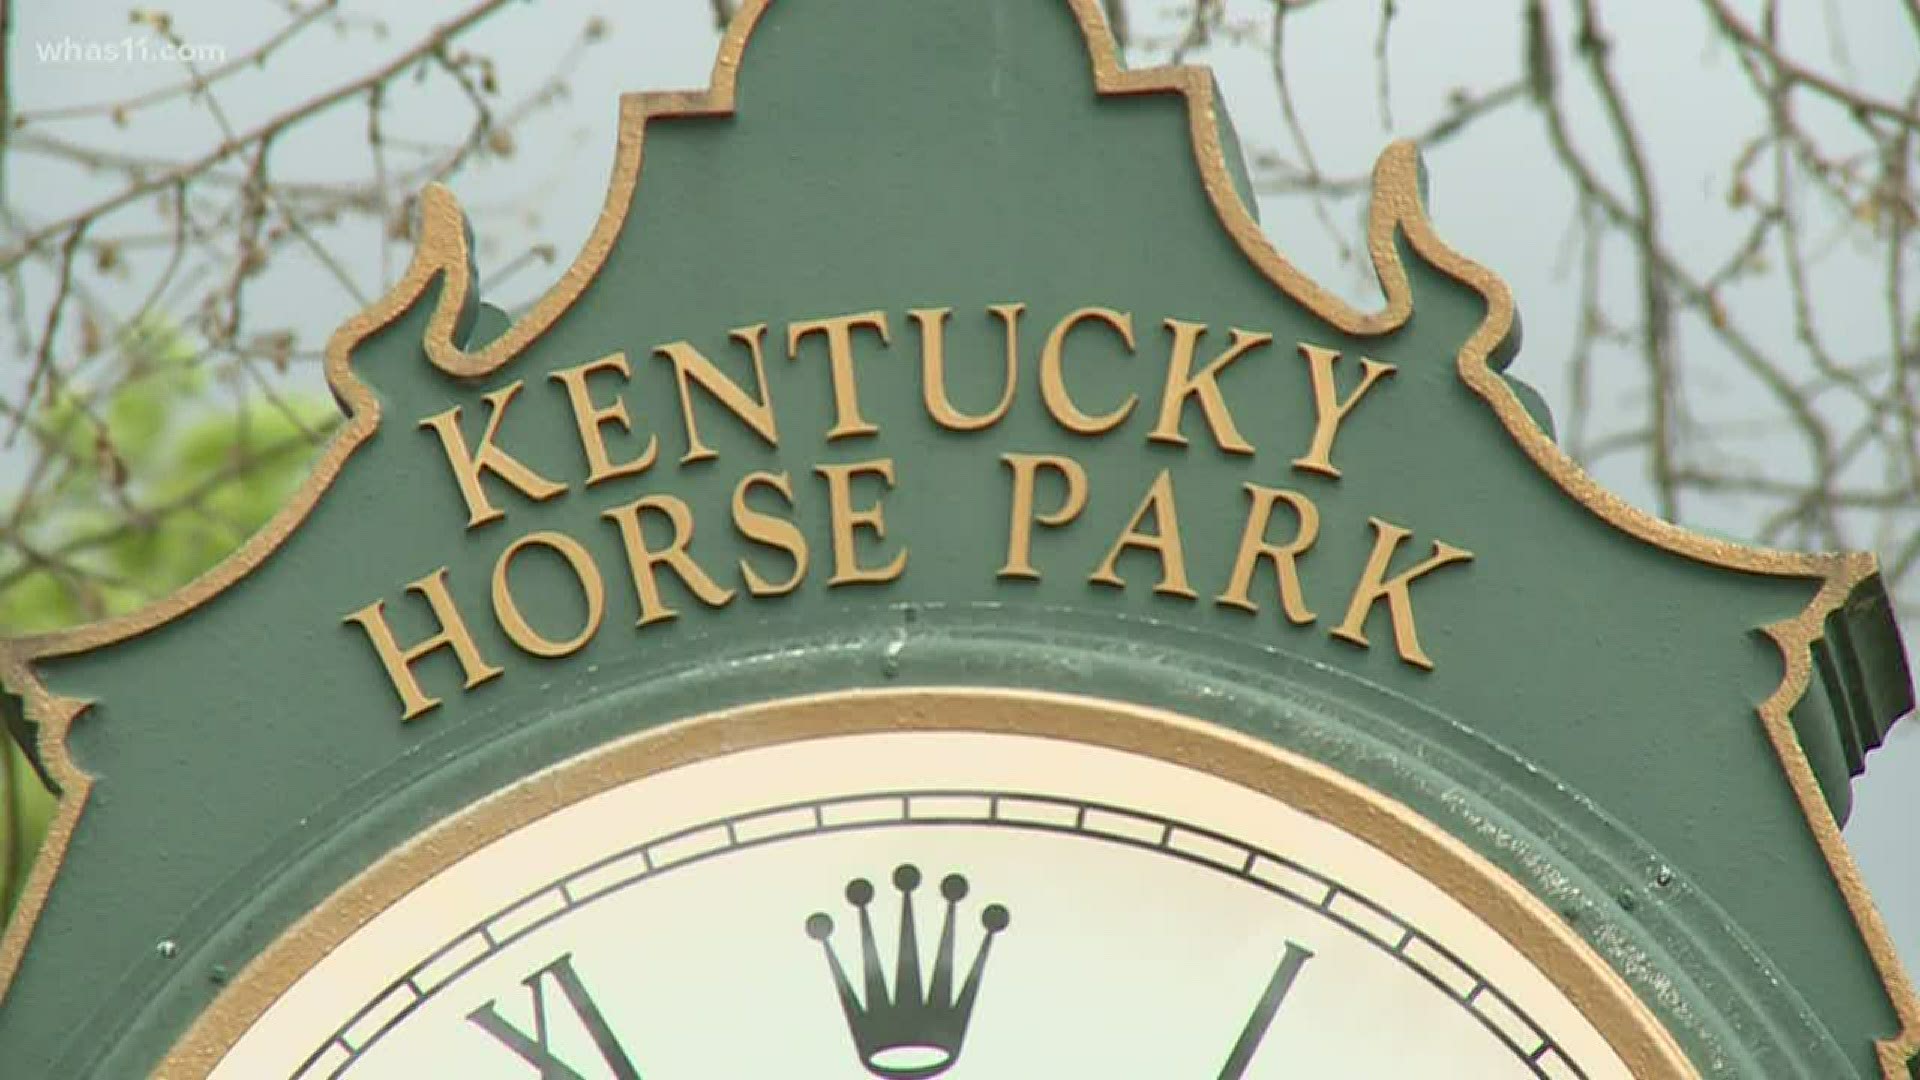 One of Kentucky's biggest horse industries is frustrated stuck in the barn waiting for word on when they can saddle up.